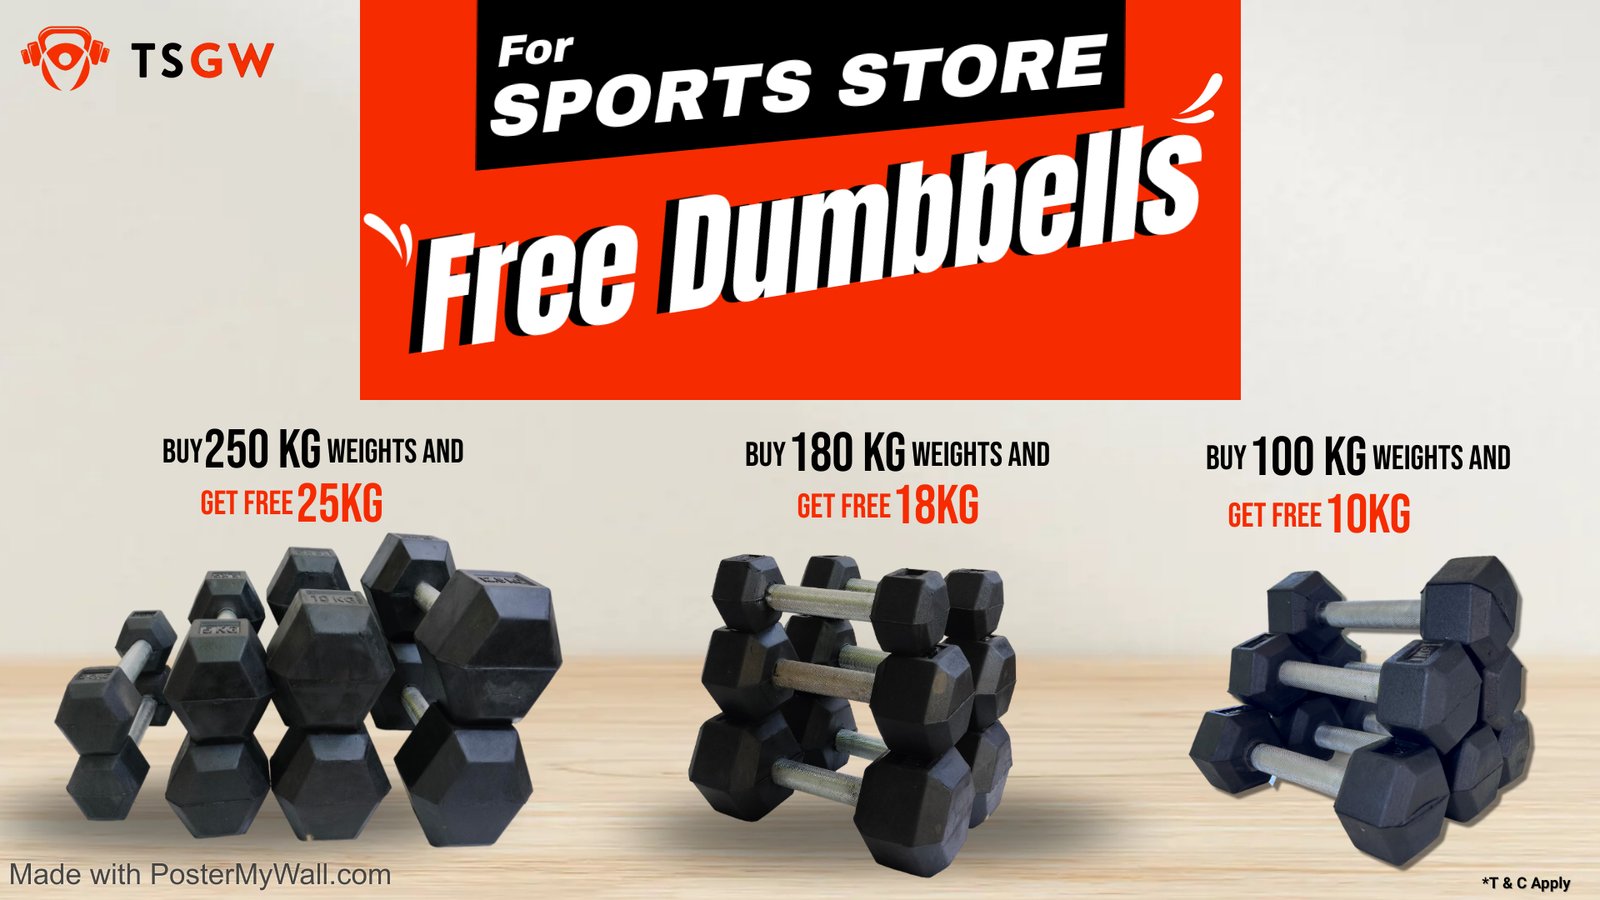 Monsoon offer for sports store owners